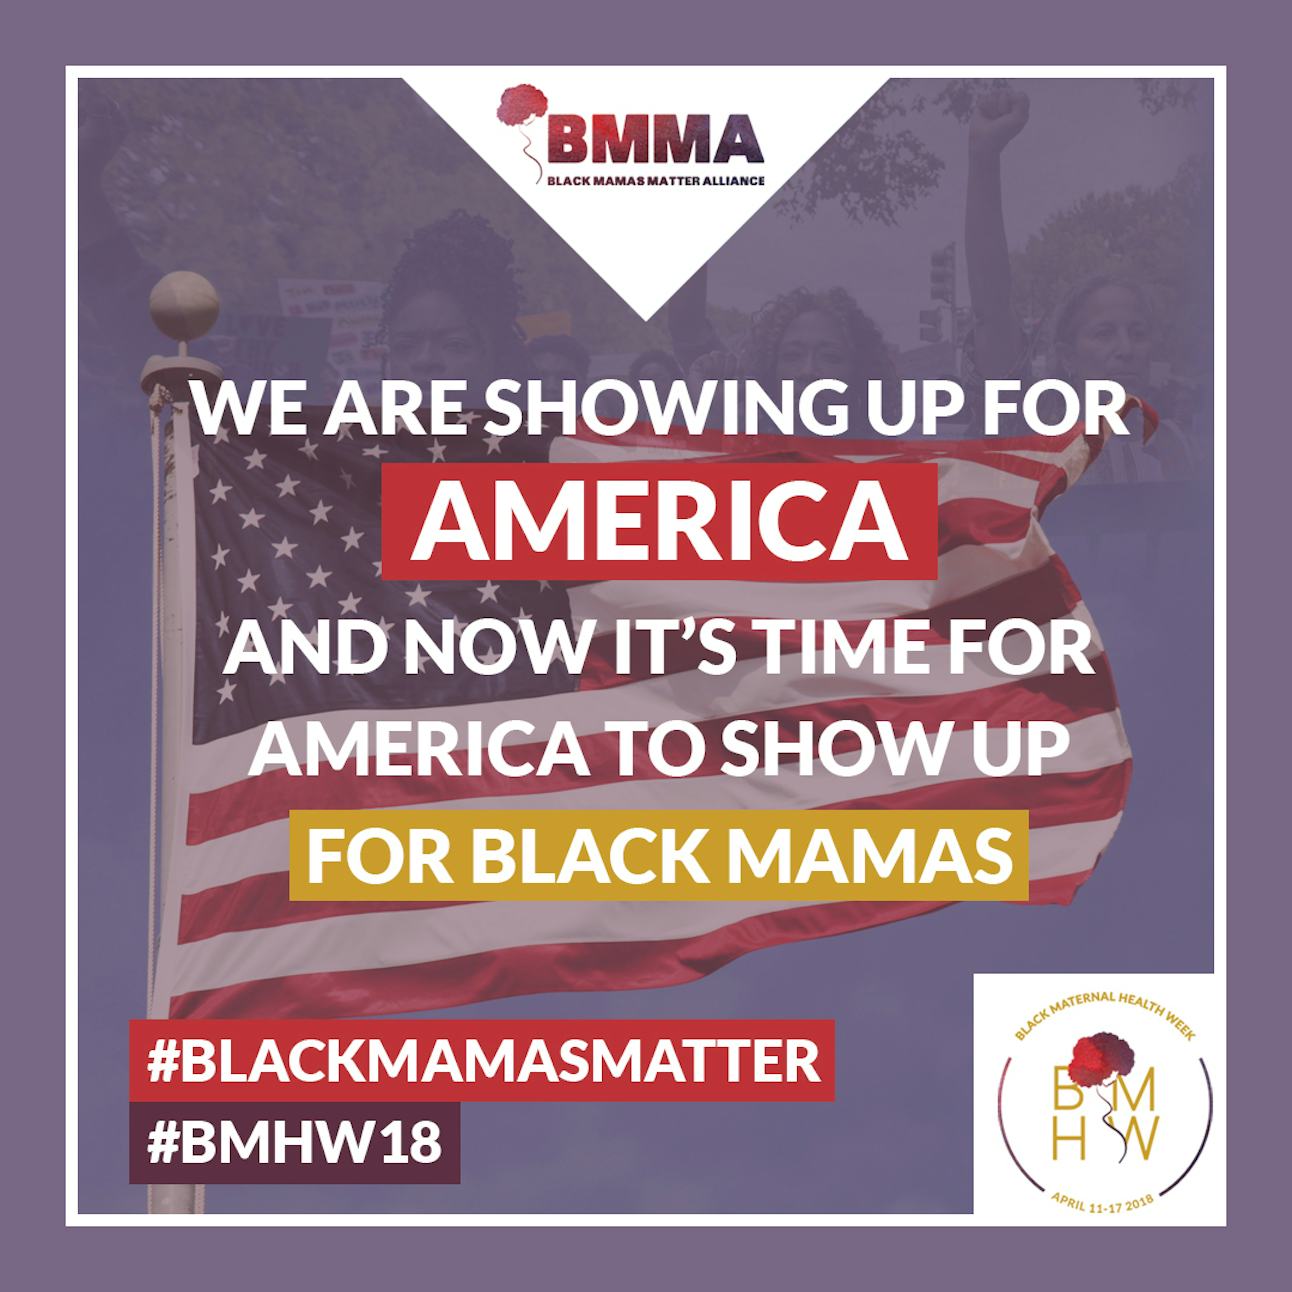 Black Mamas Matter Alliance Is Launching The First National Black